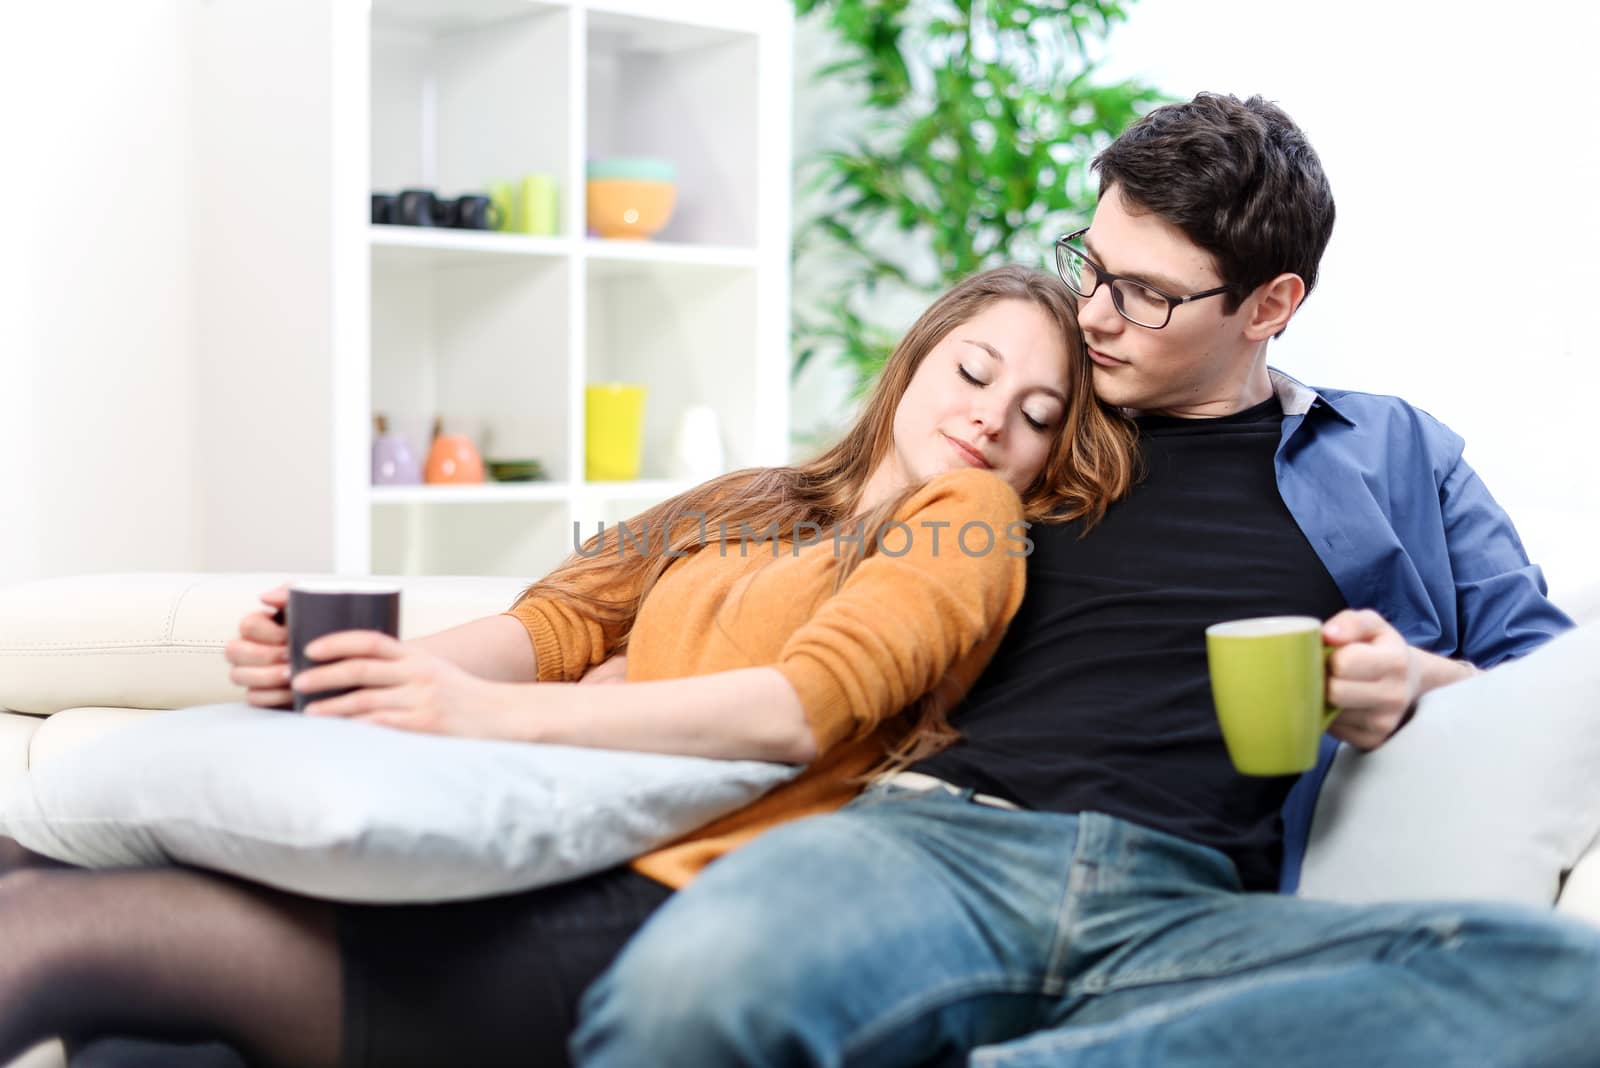 Cheerful couple relaxing together on sofa in living room